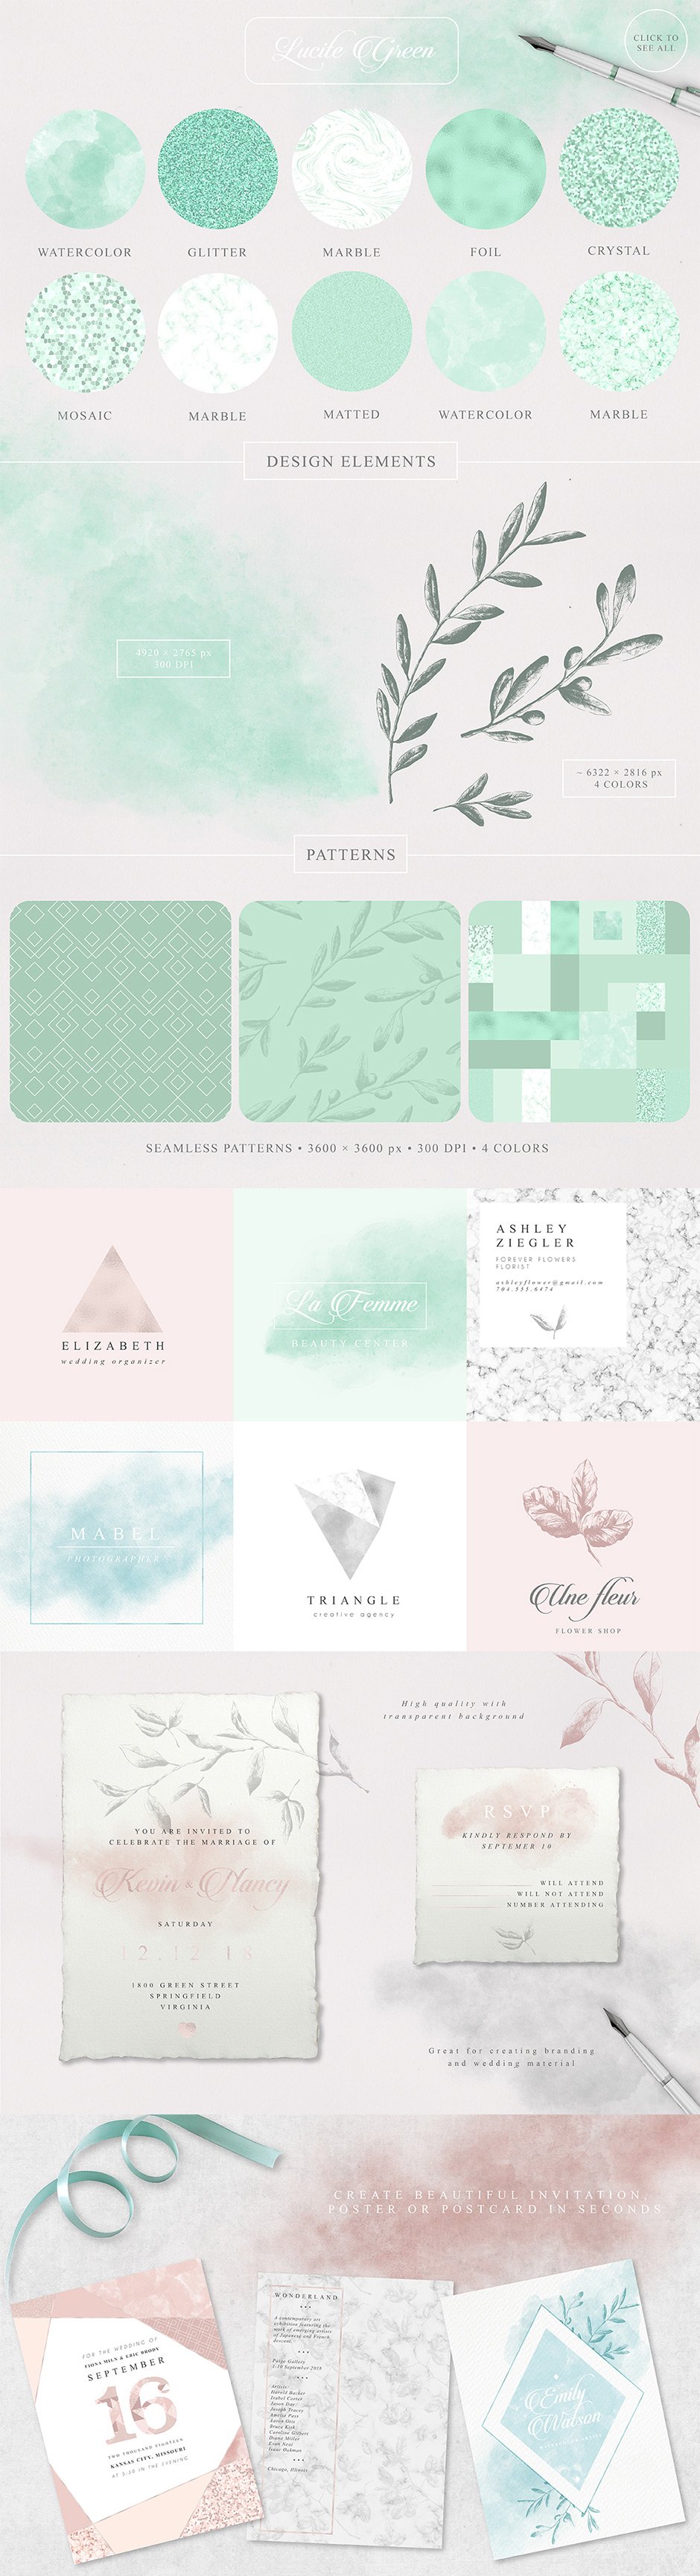 The Vibrant Textures and Patterns Bundle